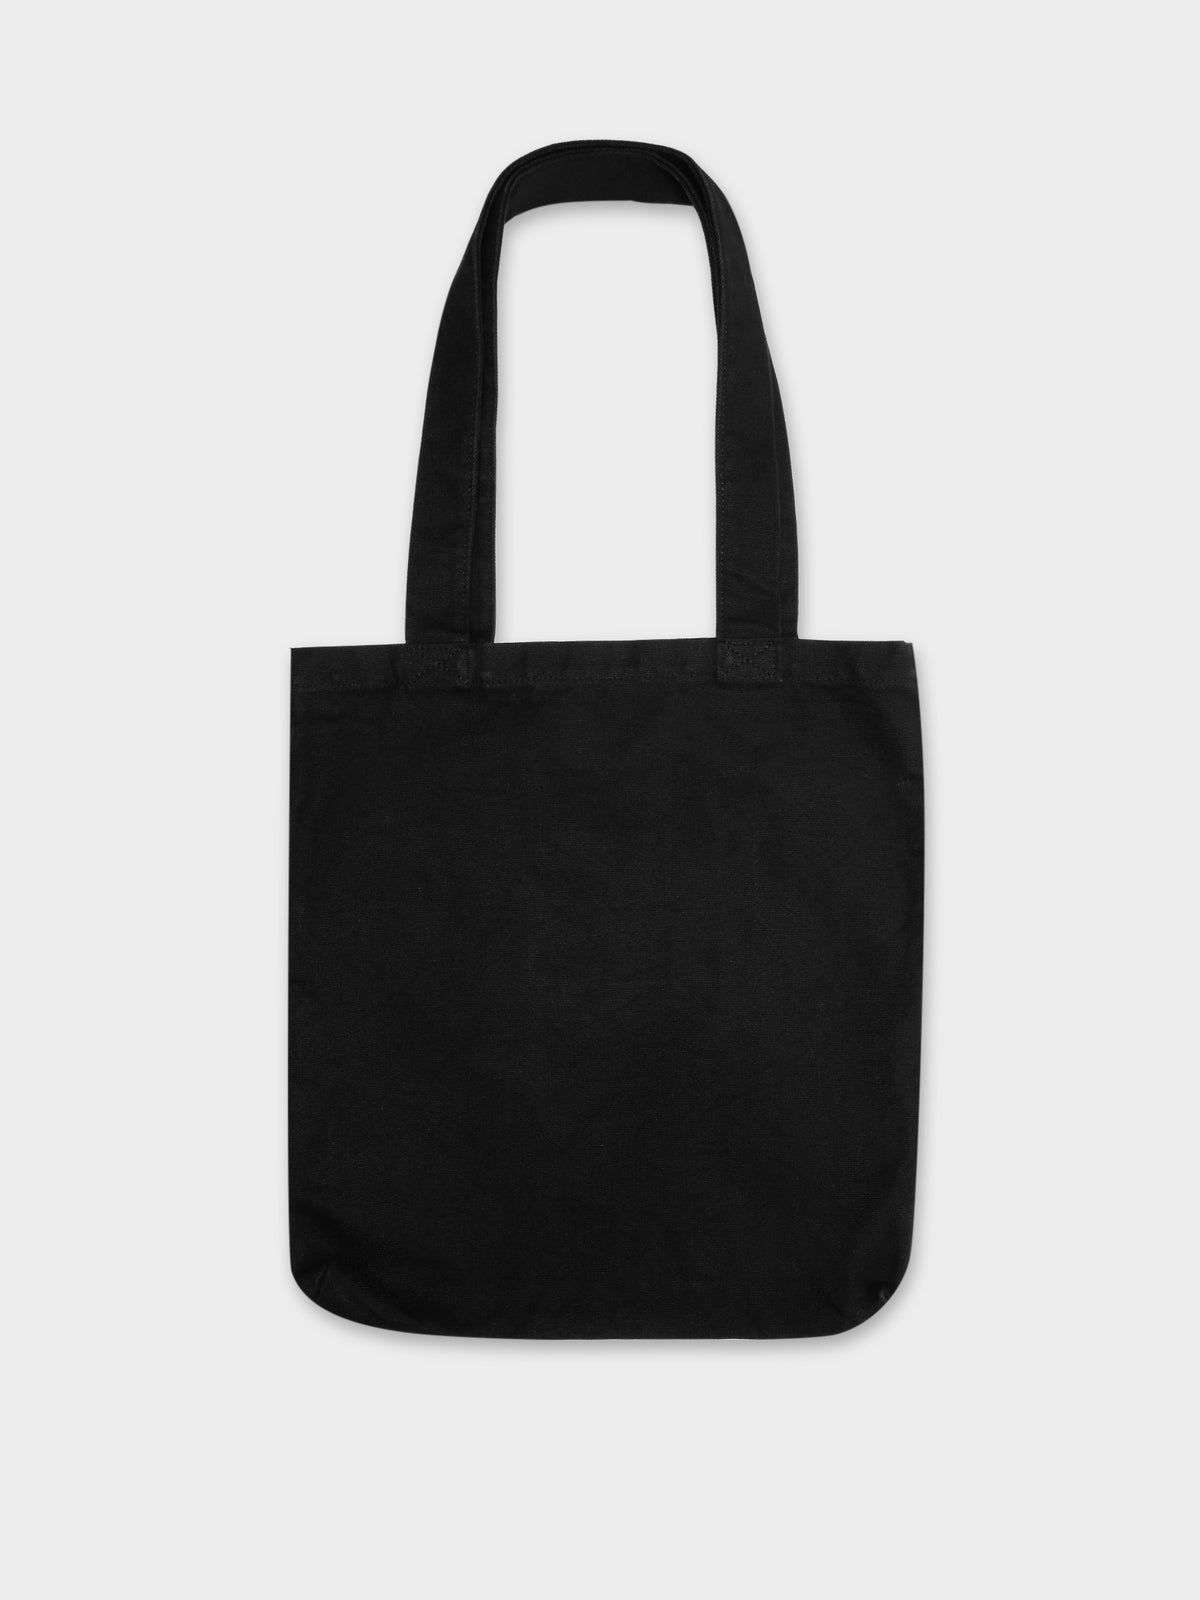 Superstition Tote in Black